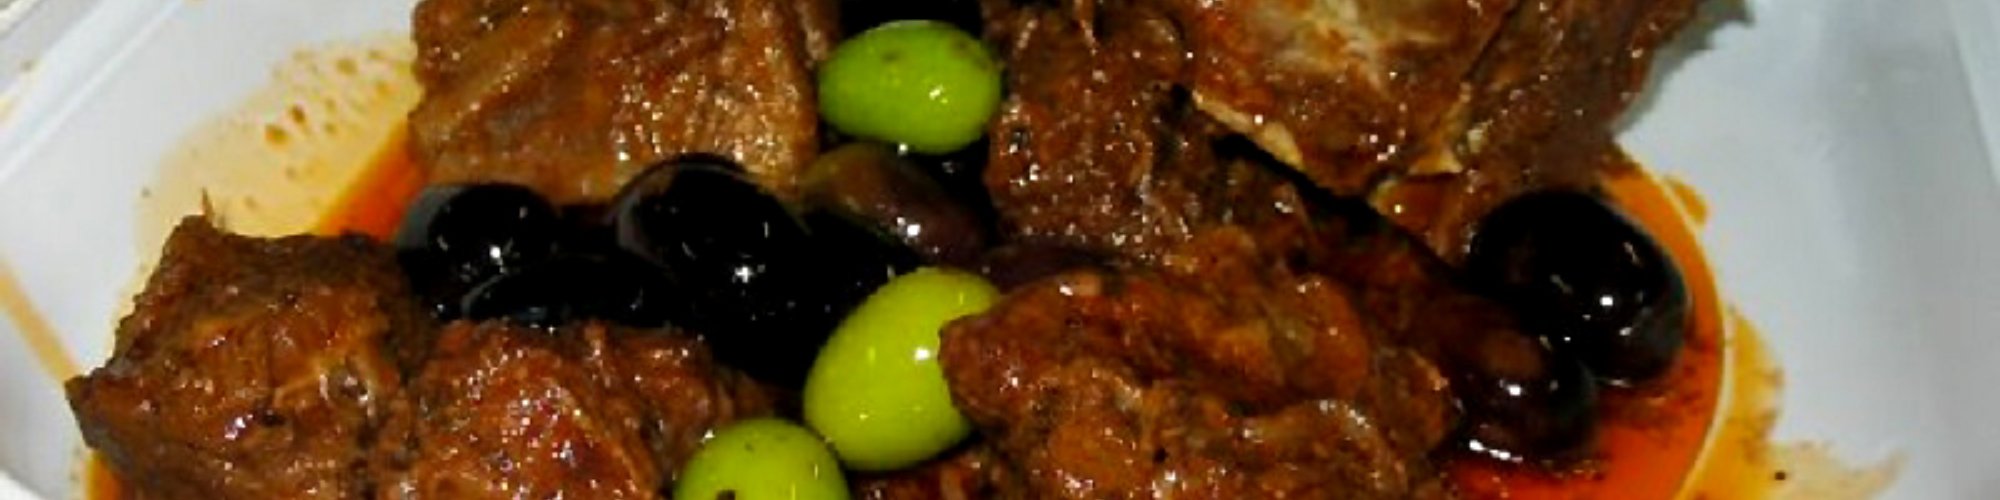 Wild boar with olives